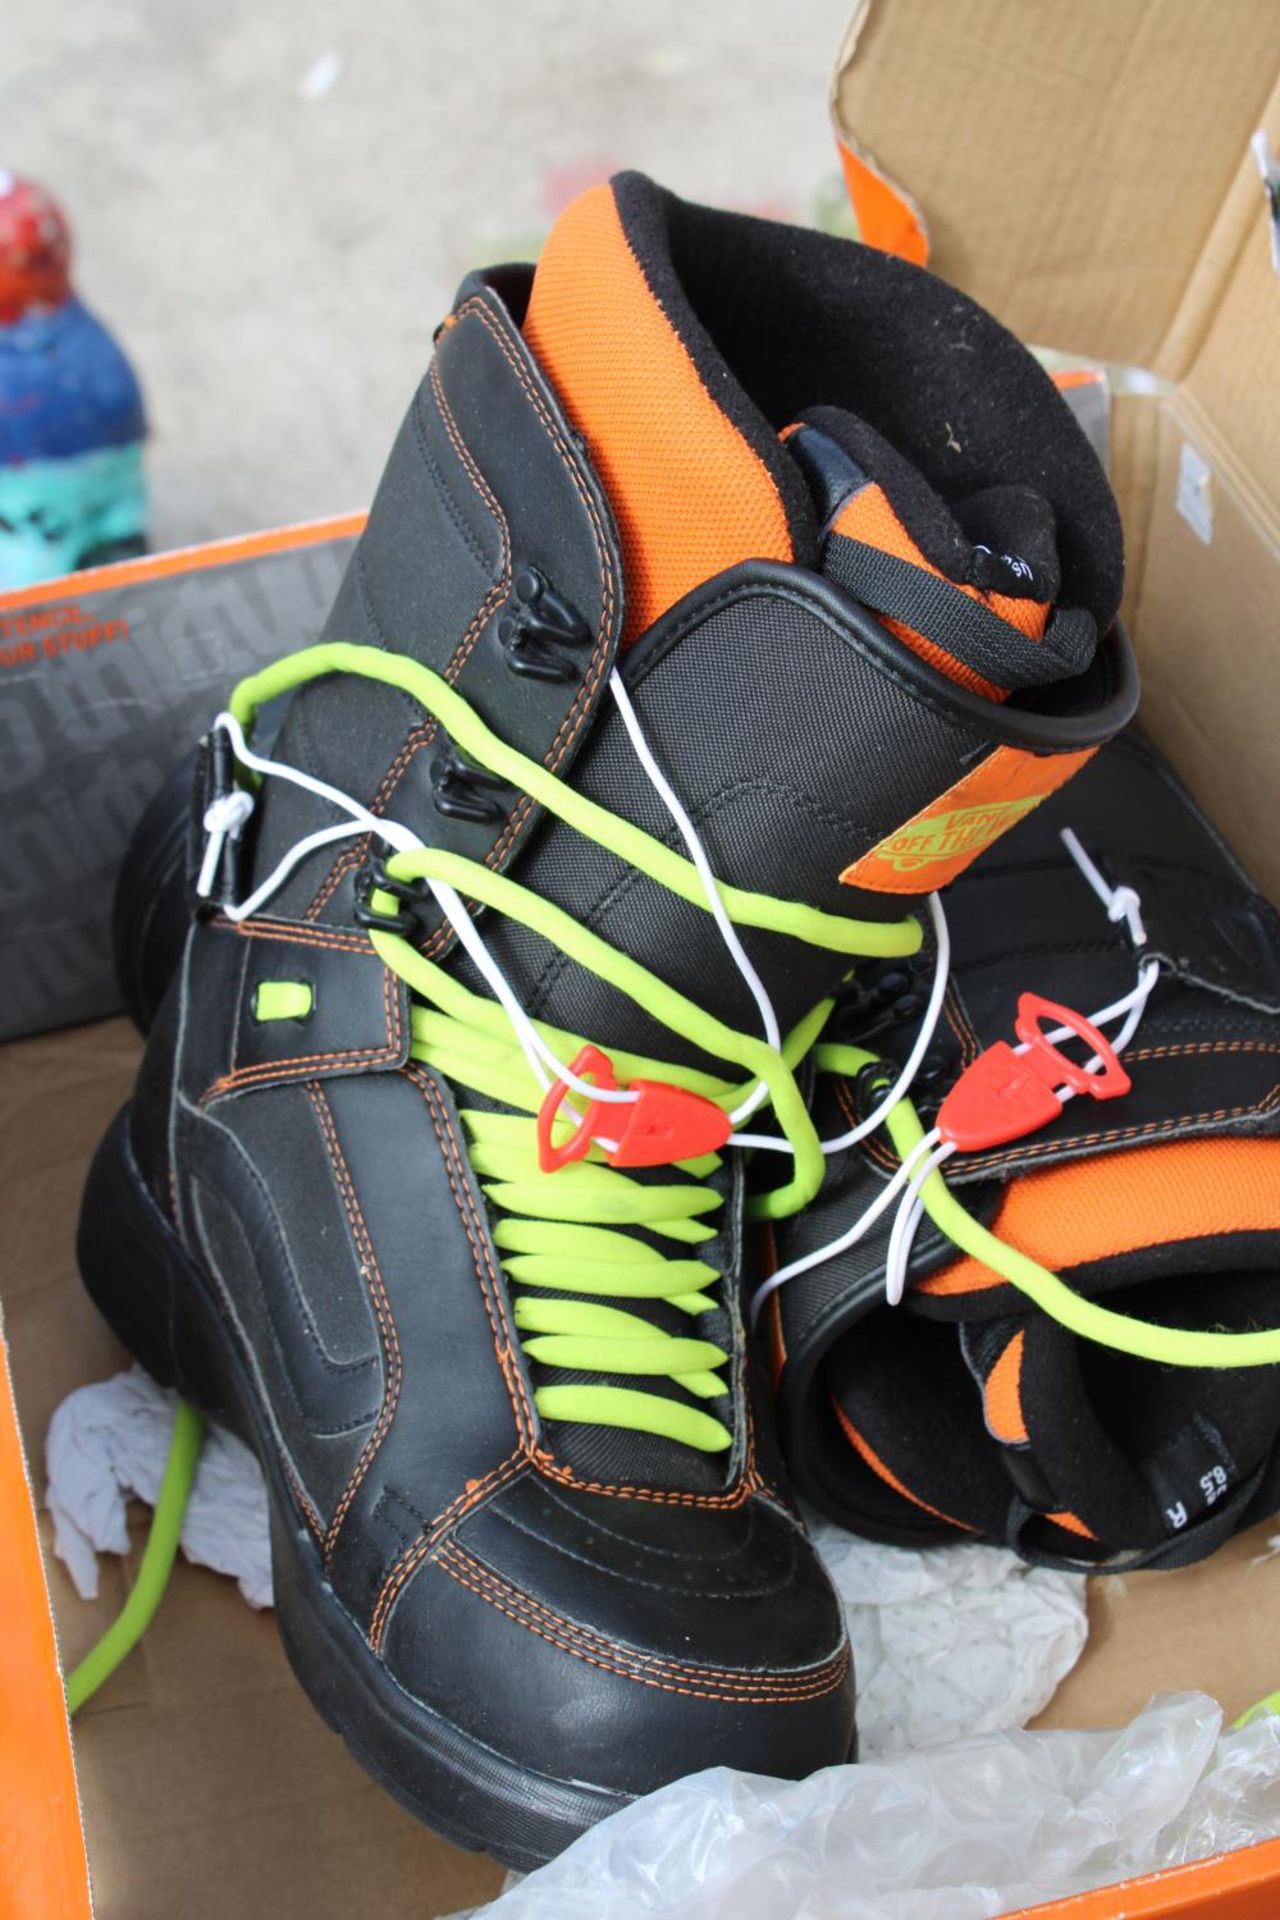 A PAIR OF VANS SNOWBOARDING BOOTS (N.B BOX DOESN'T MATCH THE BOOTS) - Image 5 of 6